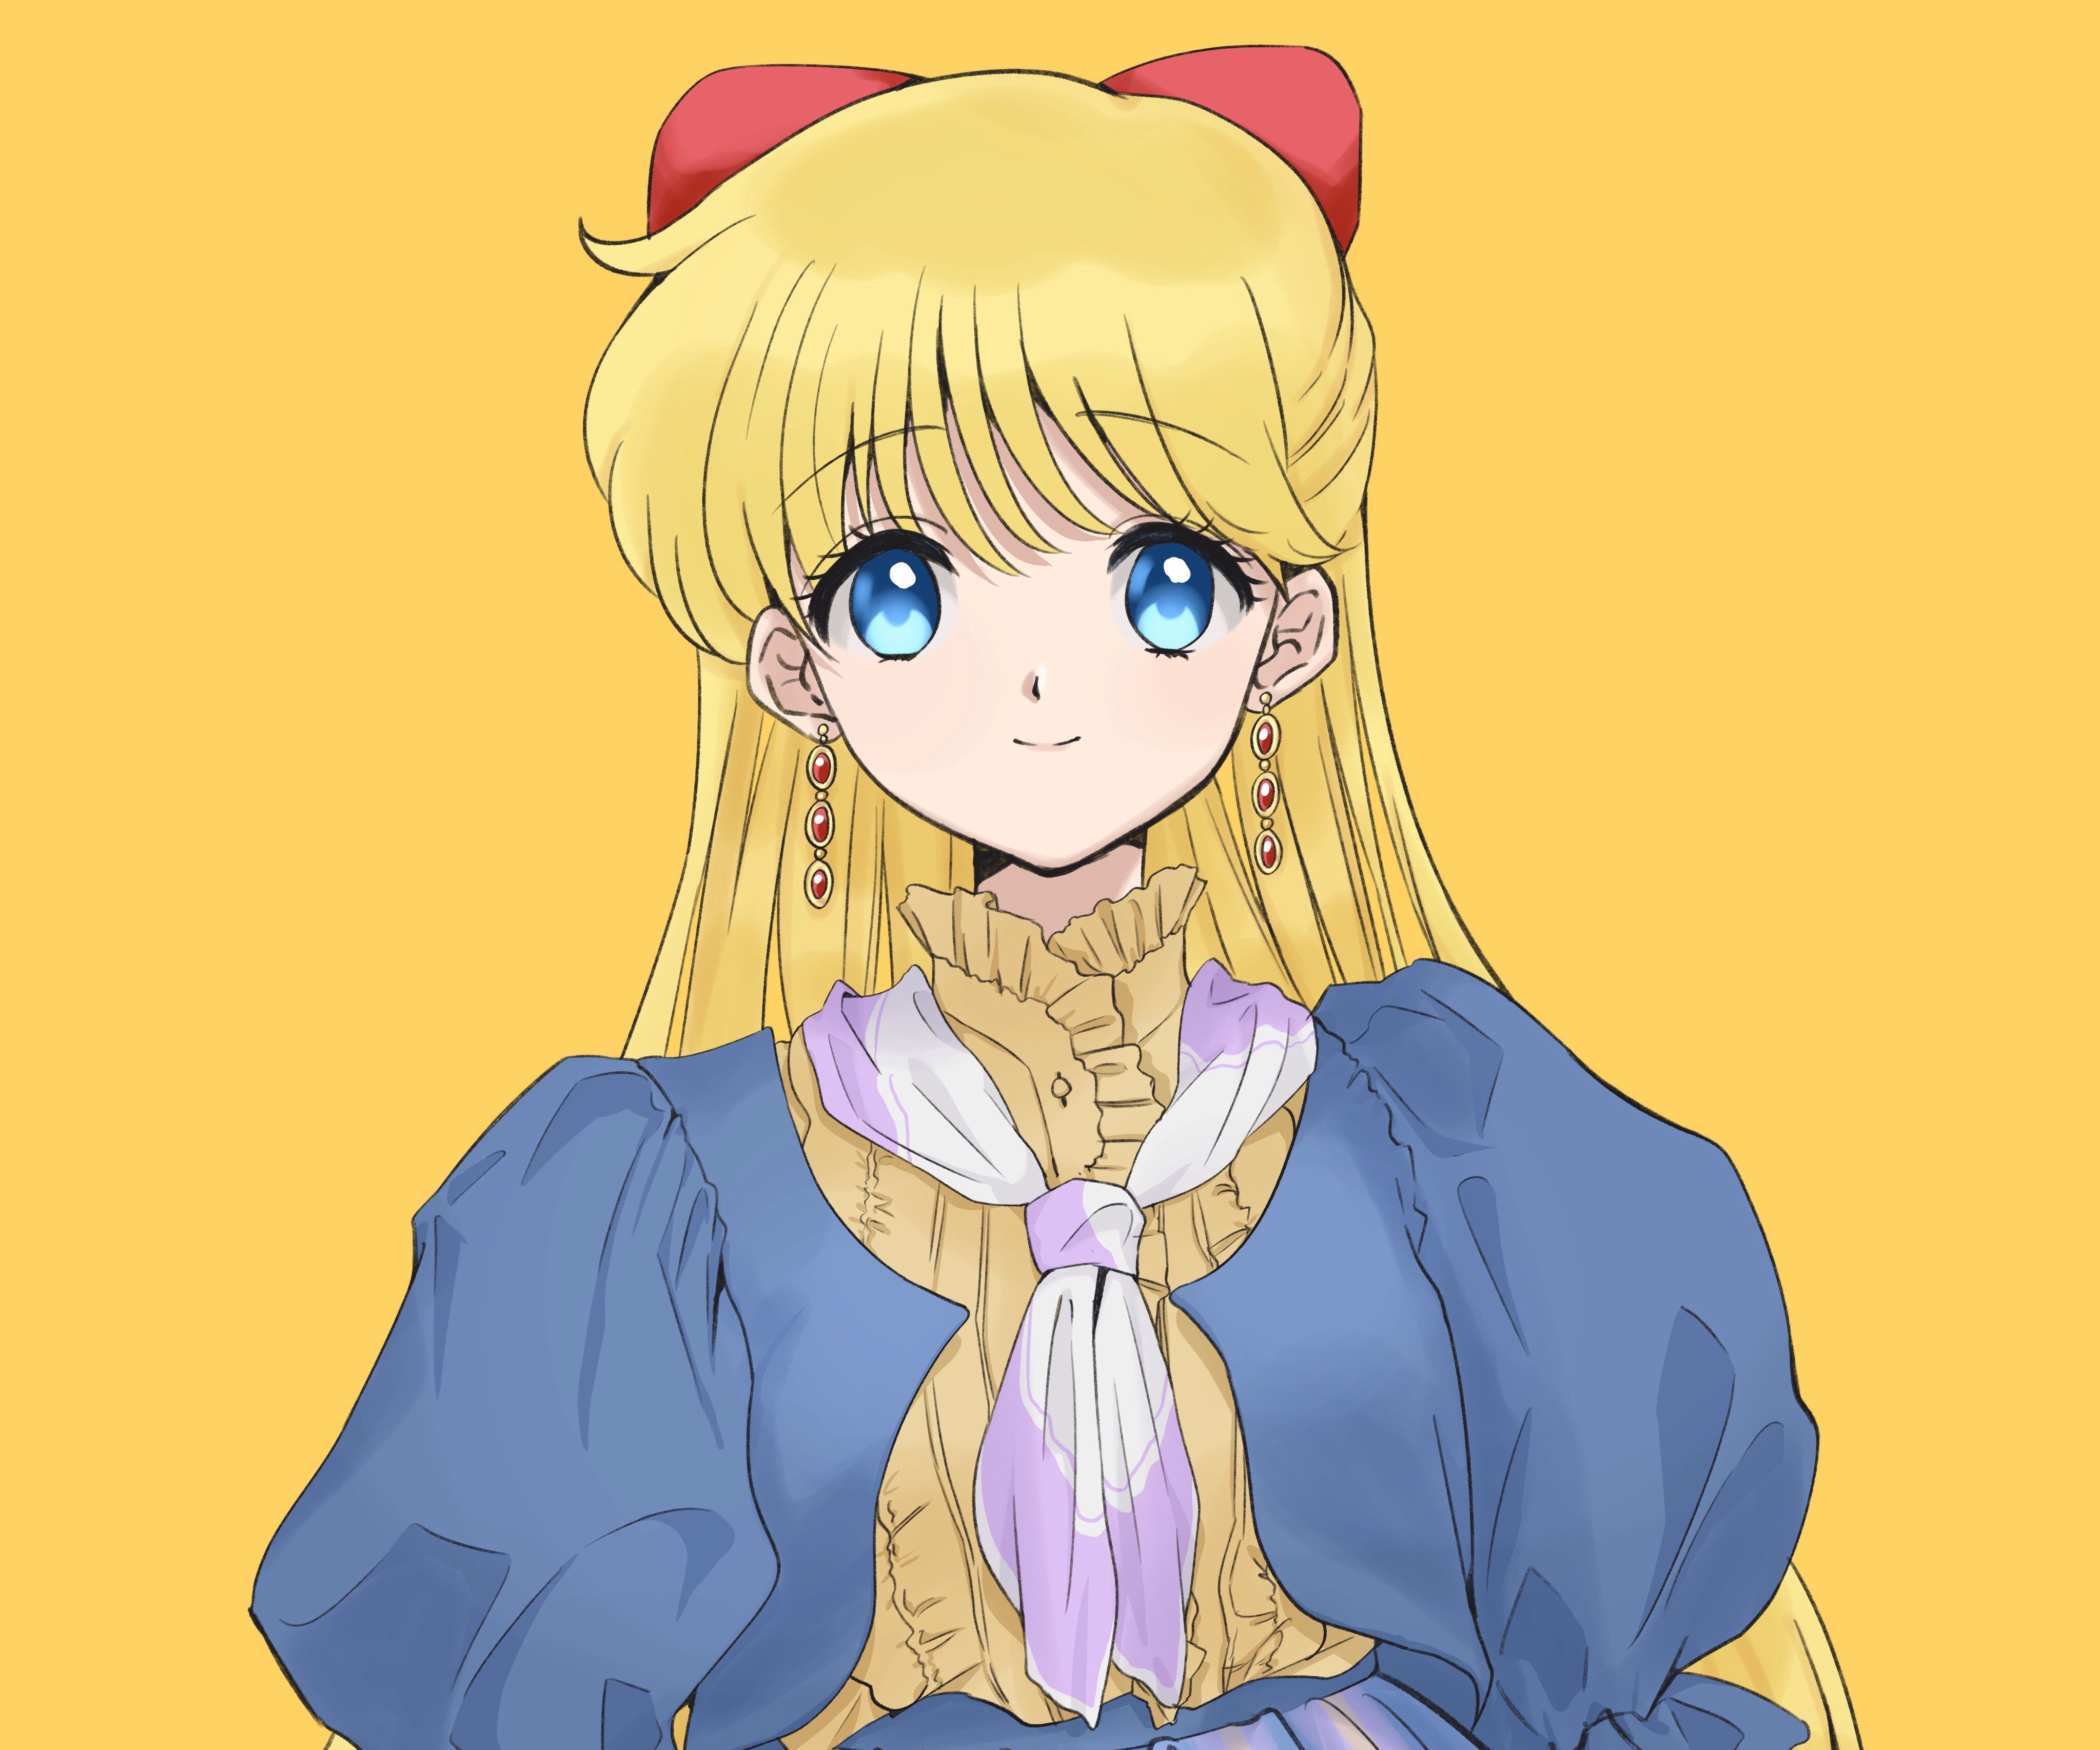 An anime girl with blonde hair and blue eyes wearing a blue dress with a white and purple bow on the front. - Sailor Venus